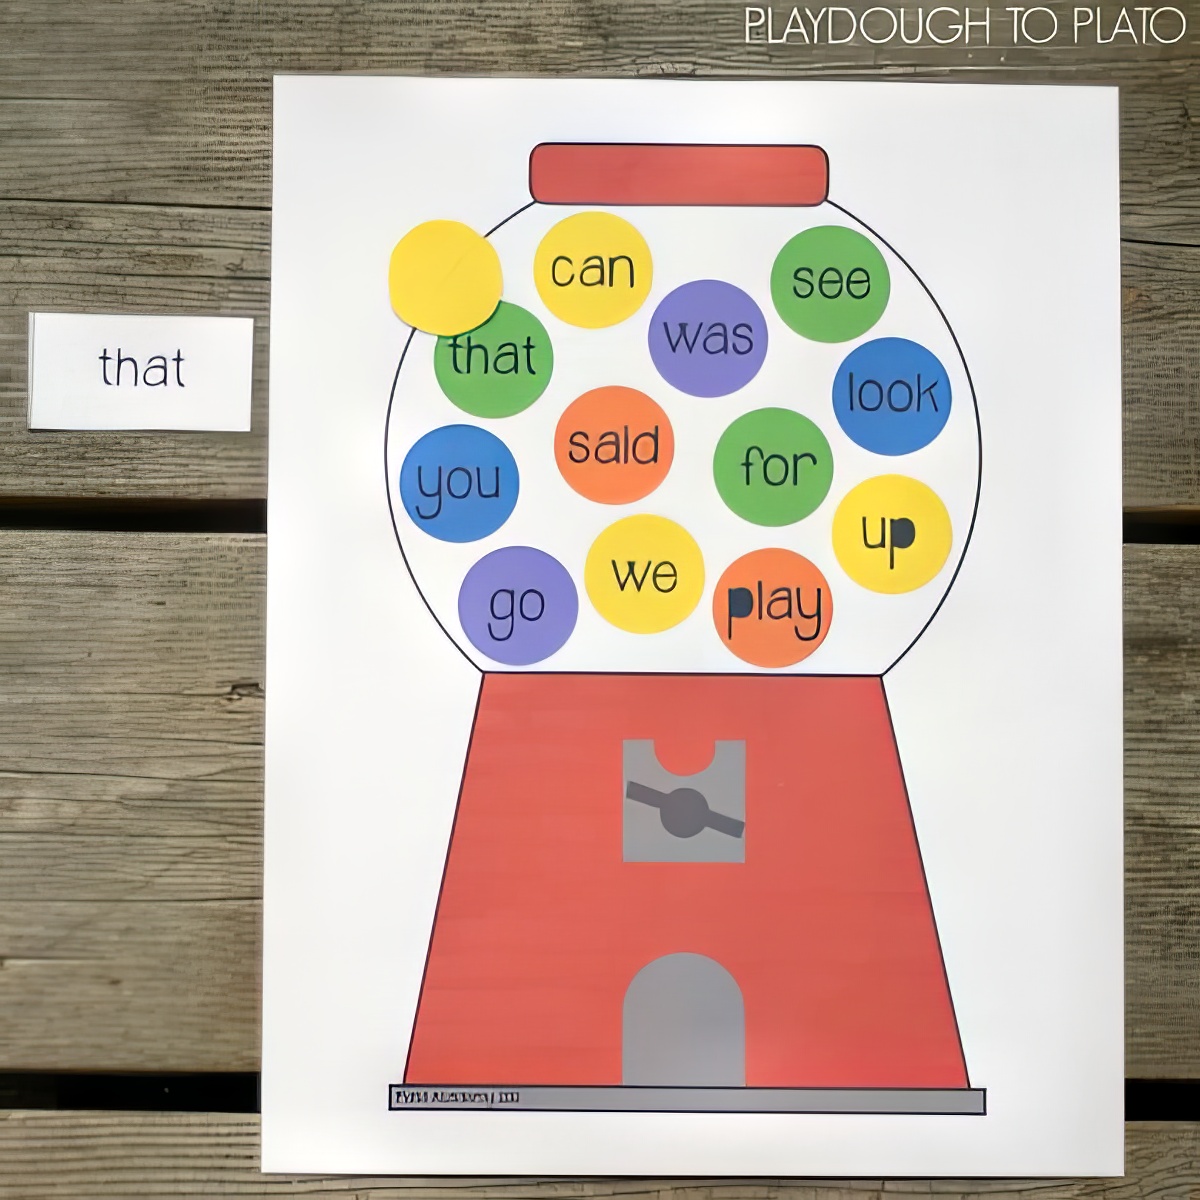 Play this sight word gum ball game with your kids and have fun learning at the same time!